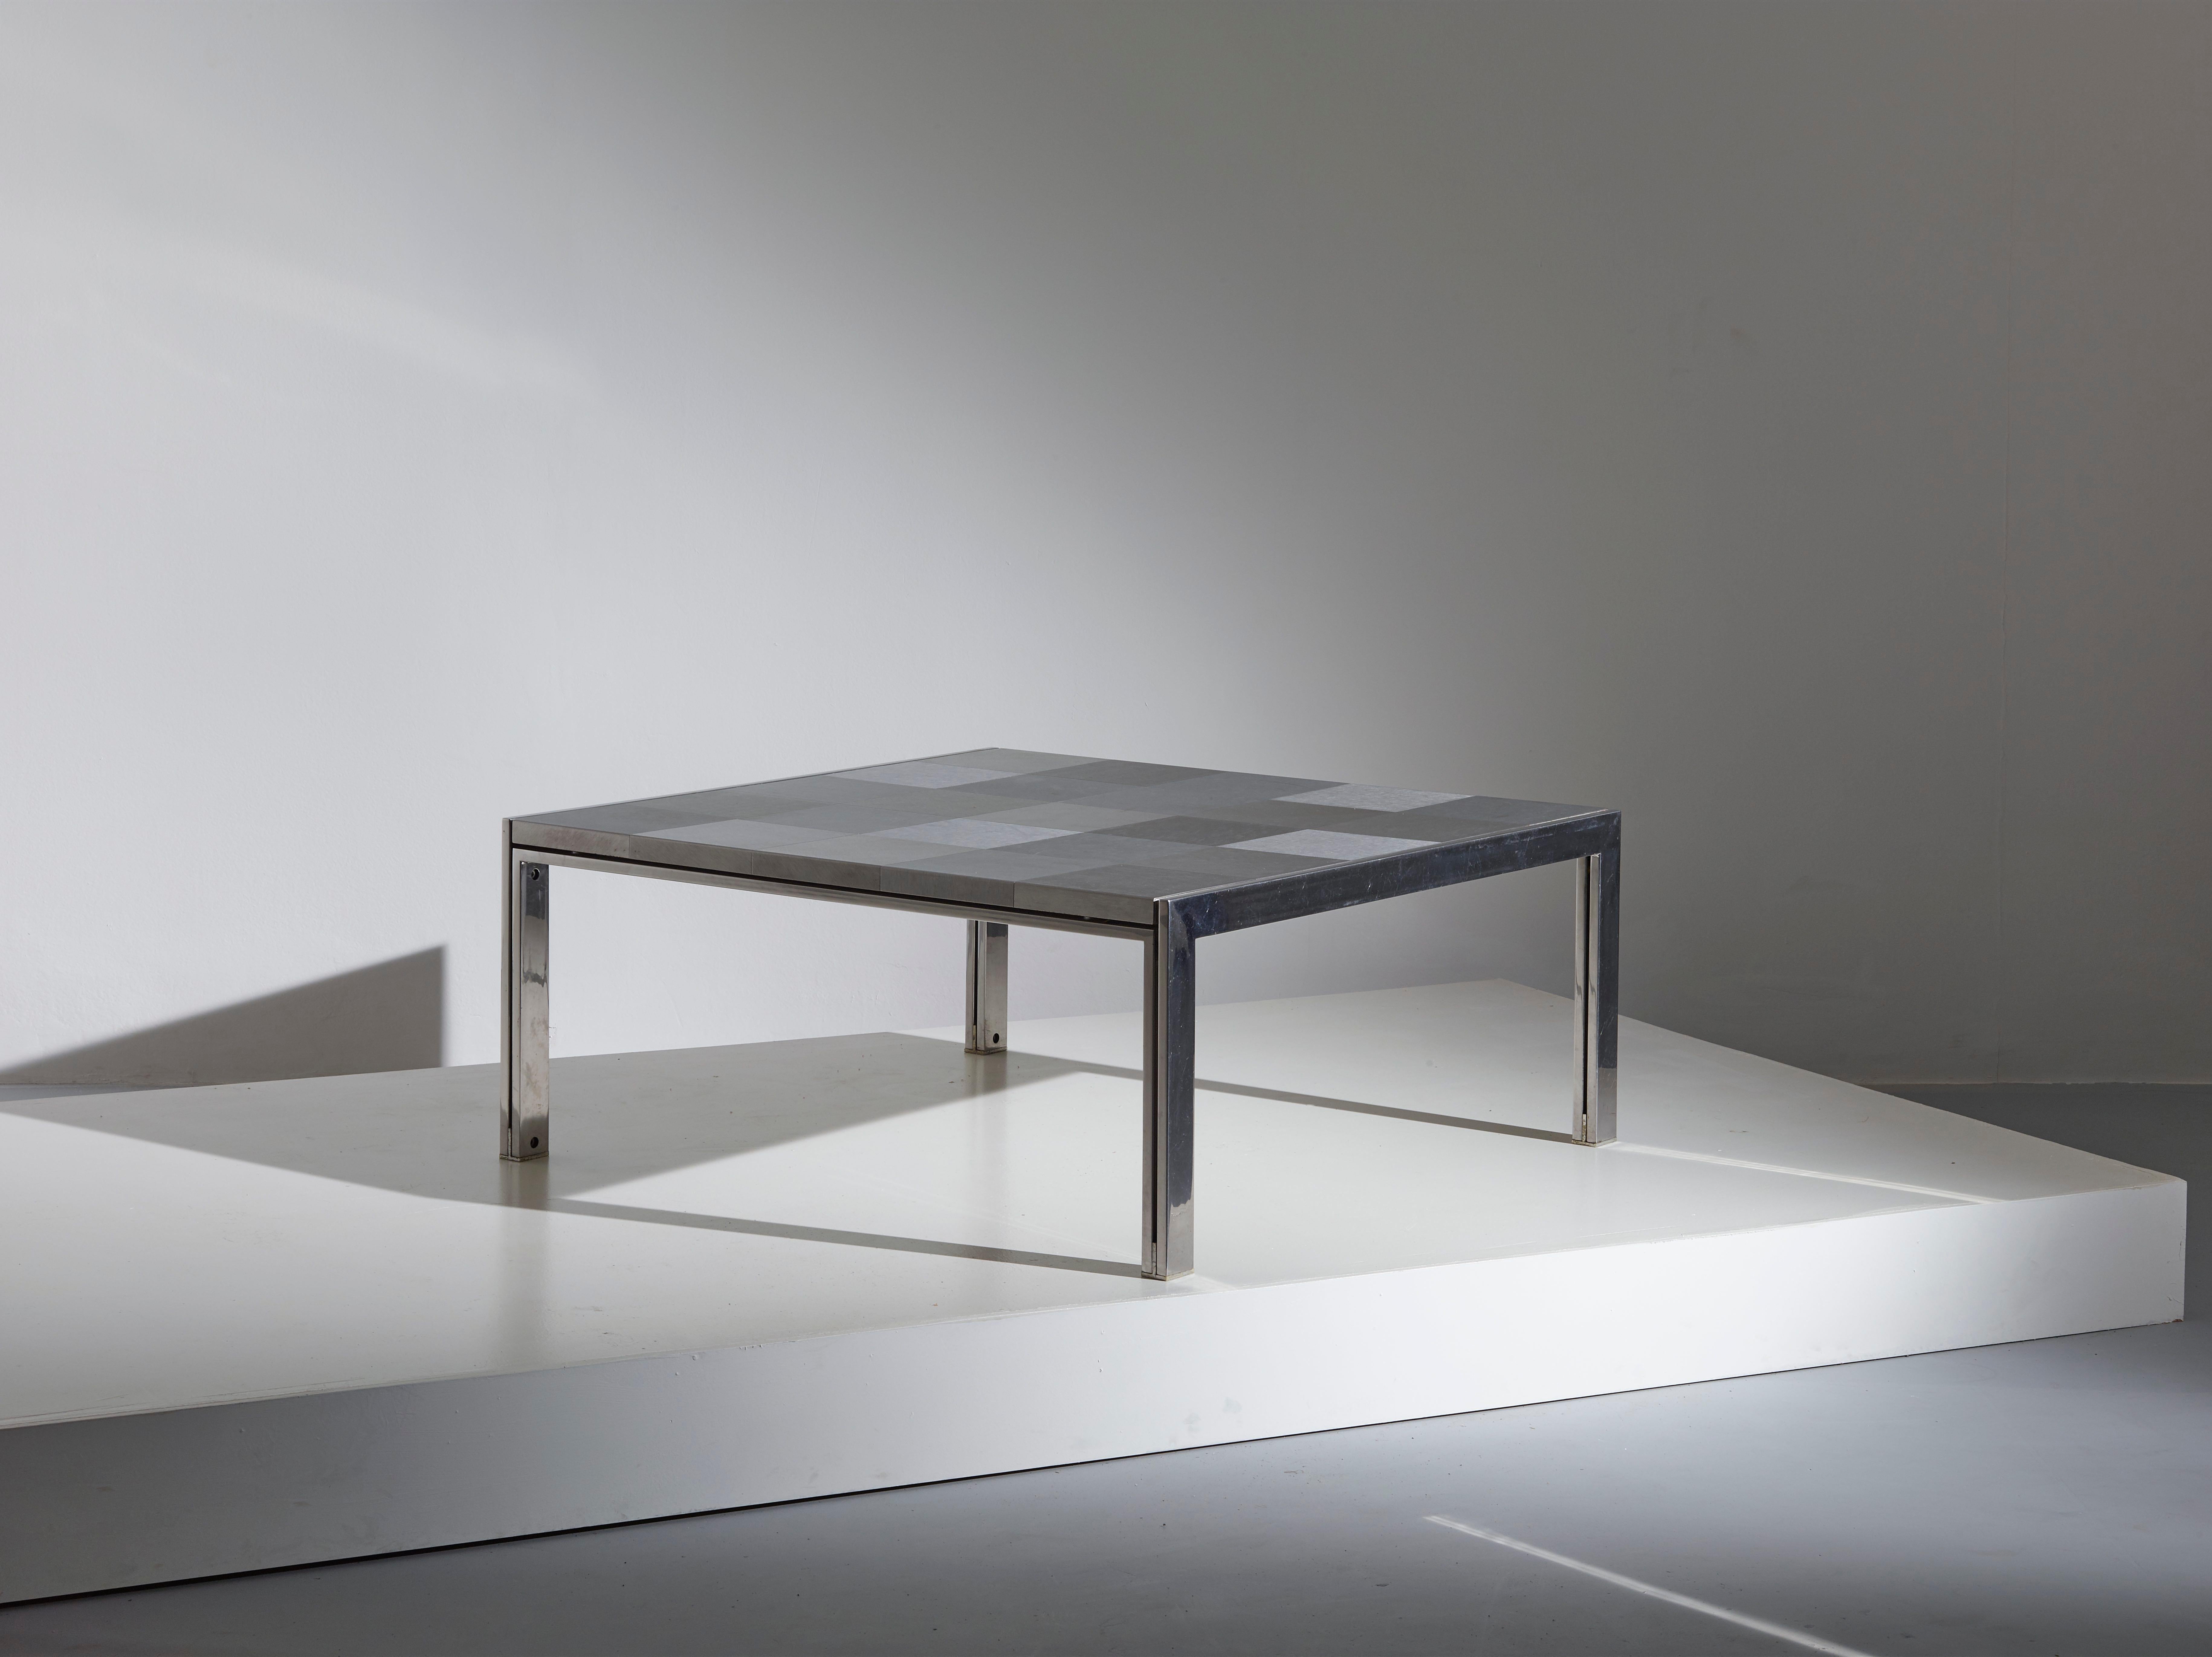 A minimalistic square Luar coffee table designed by Ross Littel for ICF-De Padova (Italy). This side table is made of steel, wood and aluminium and stands out for its essential style.

Dimensions: 99 x 99 x 42.5 cm [DxWxH]

Condition: Very good